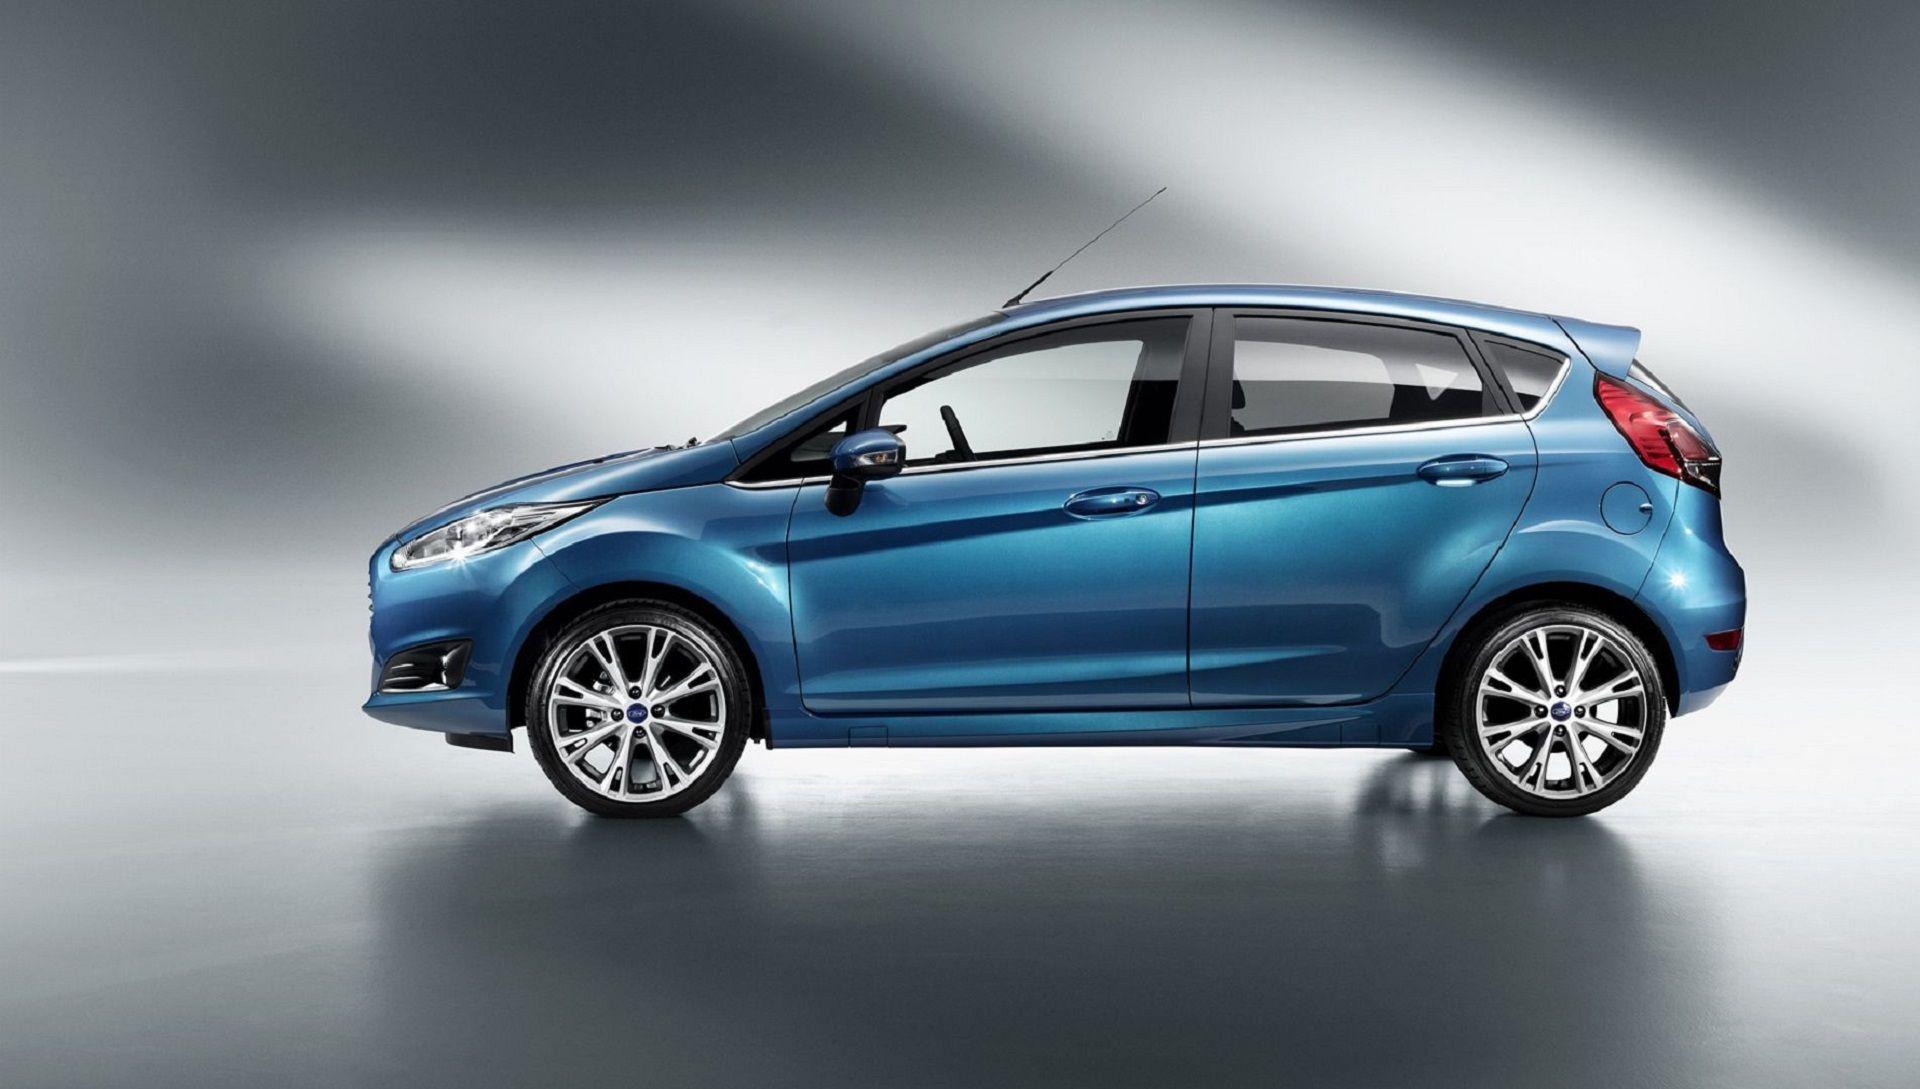 Ford Fiesta Wallpaper Image Photo Picture Background